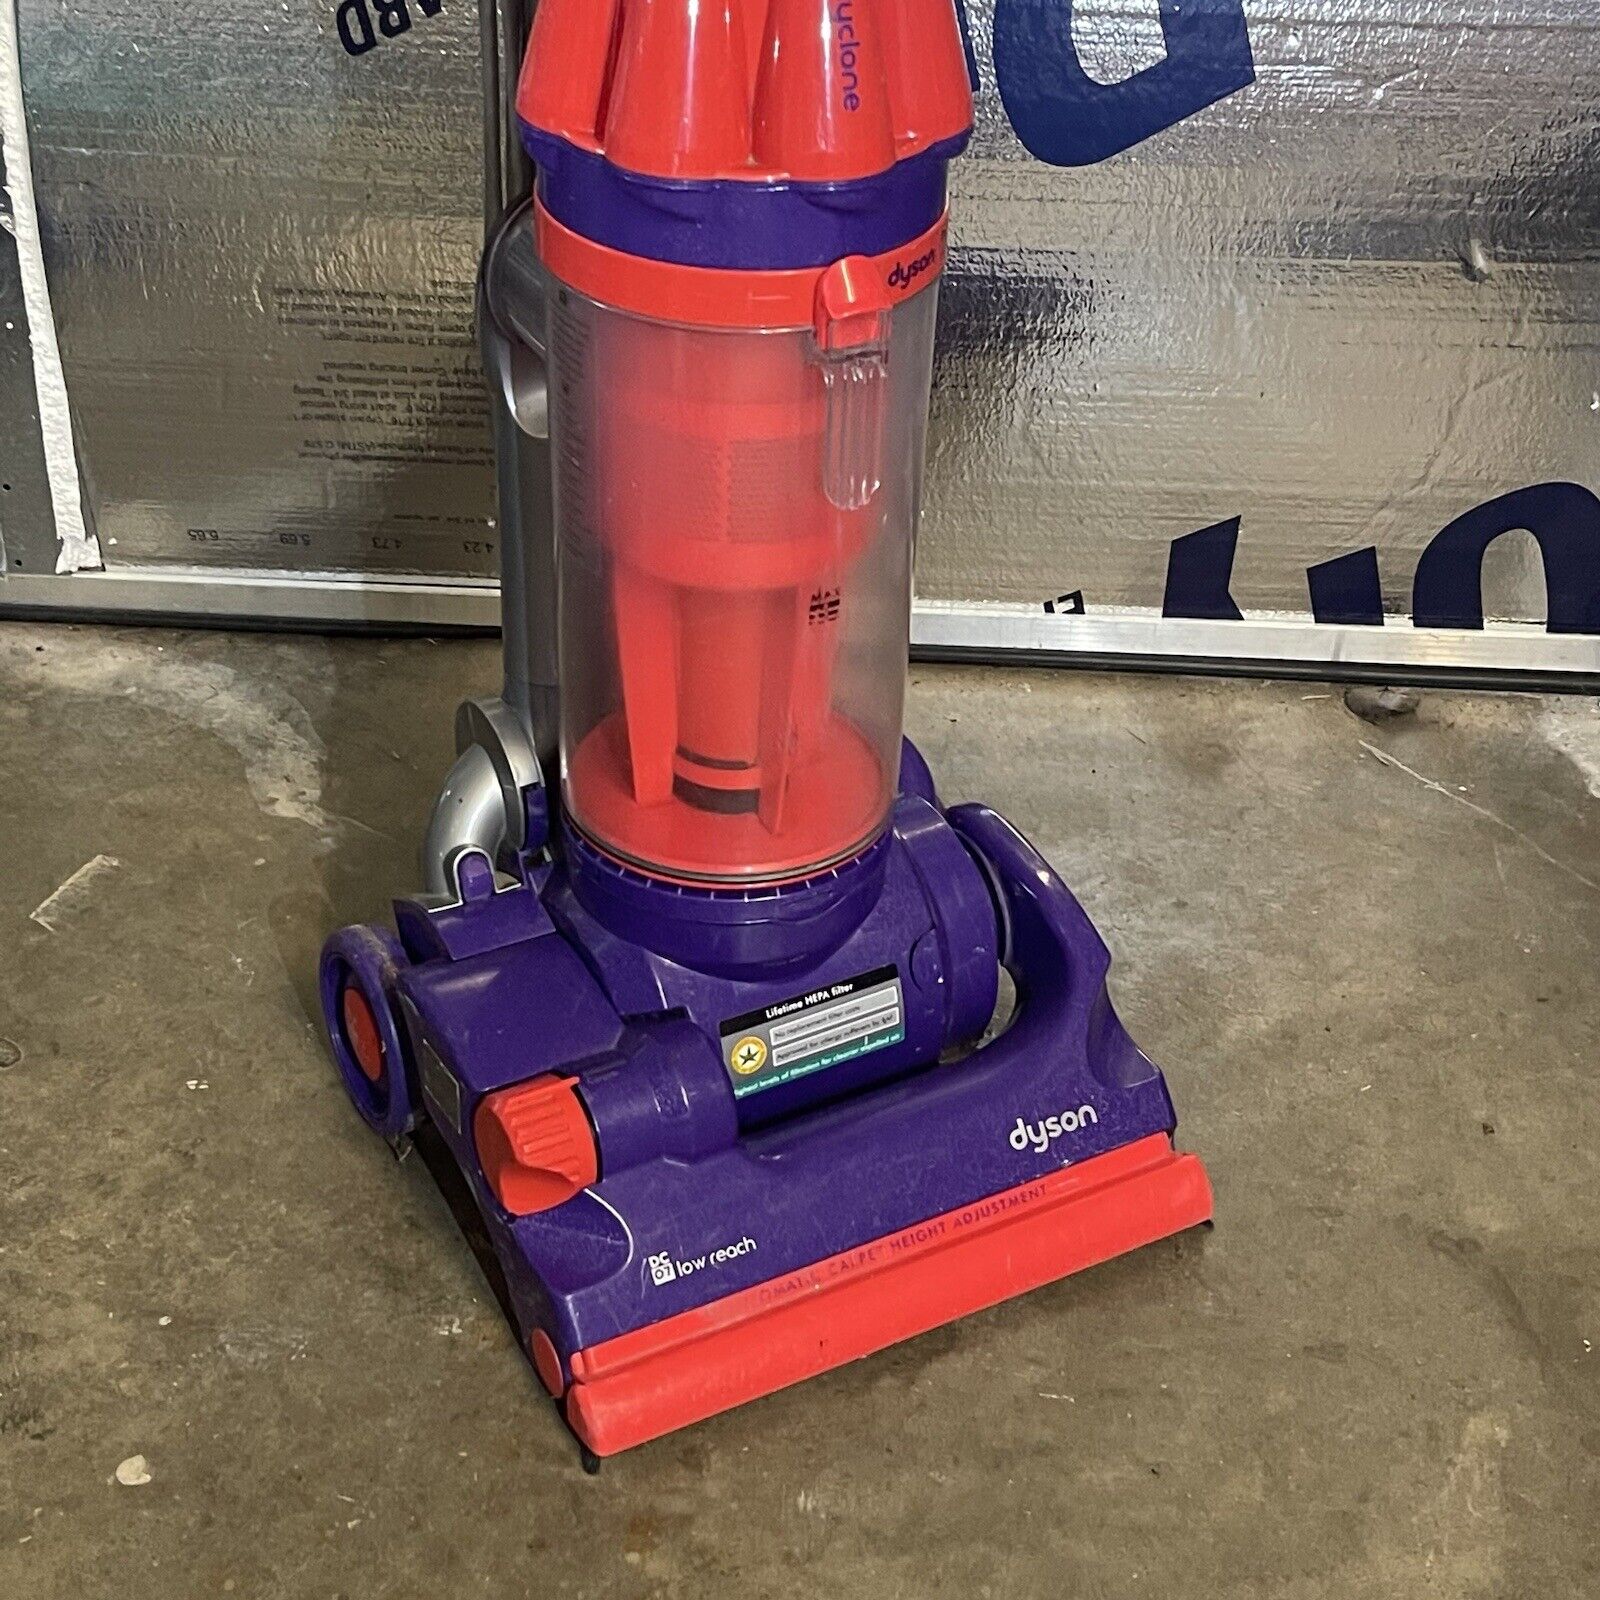 Dyson DC07 Vacuum Cleaner - Purple and Red - Tested Working